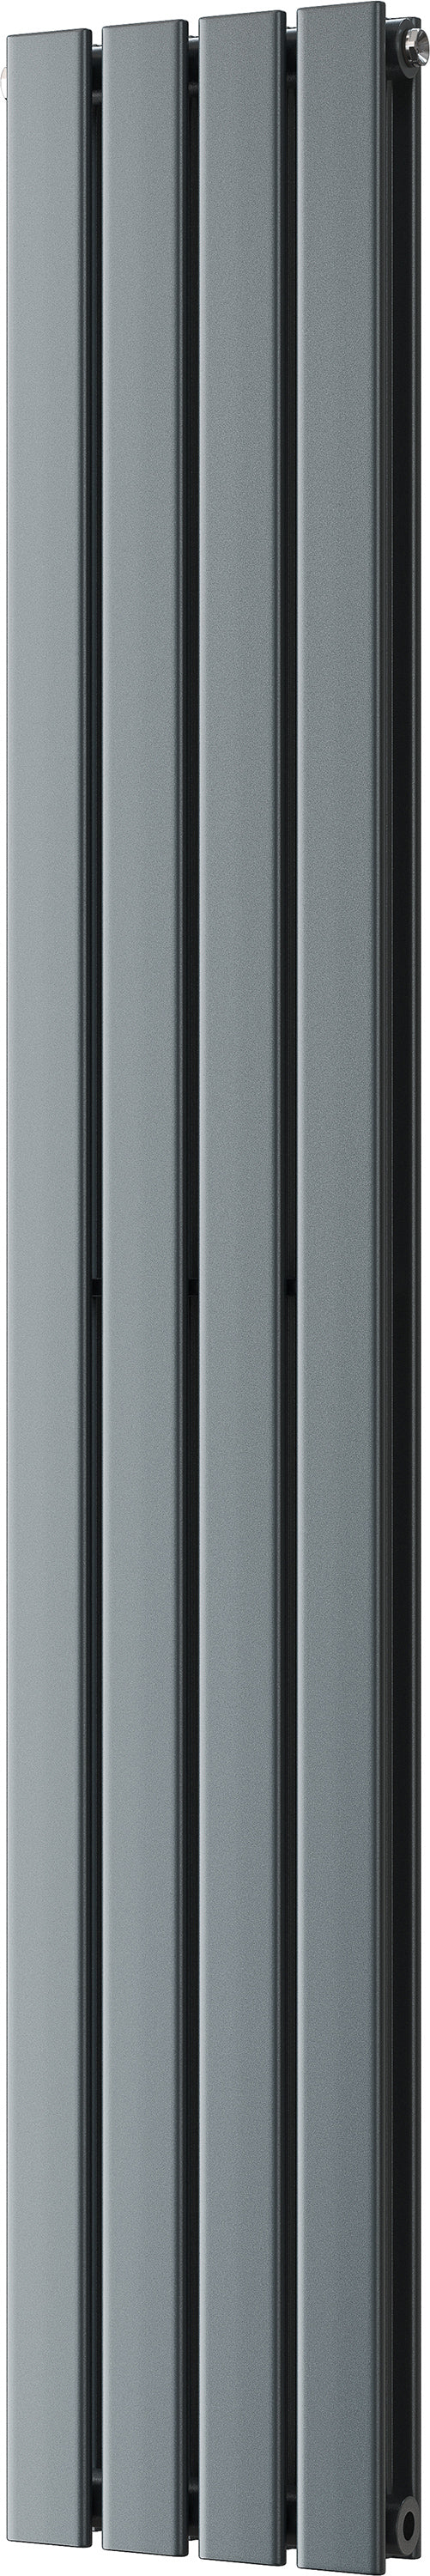 Typhoon - Anthracite Vertical Radiator H1600mm x W272mm Double Panel